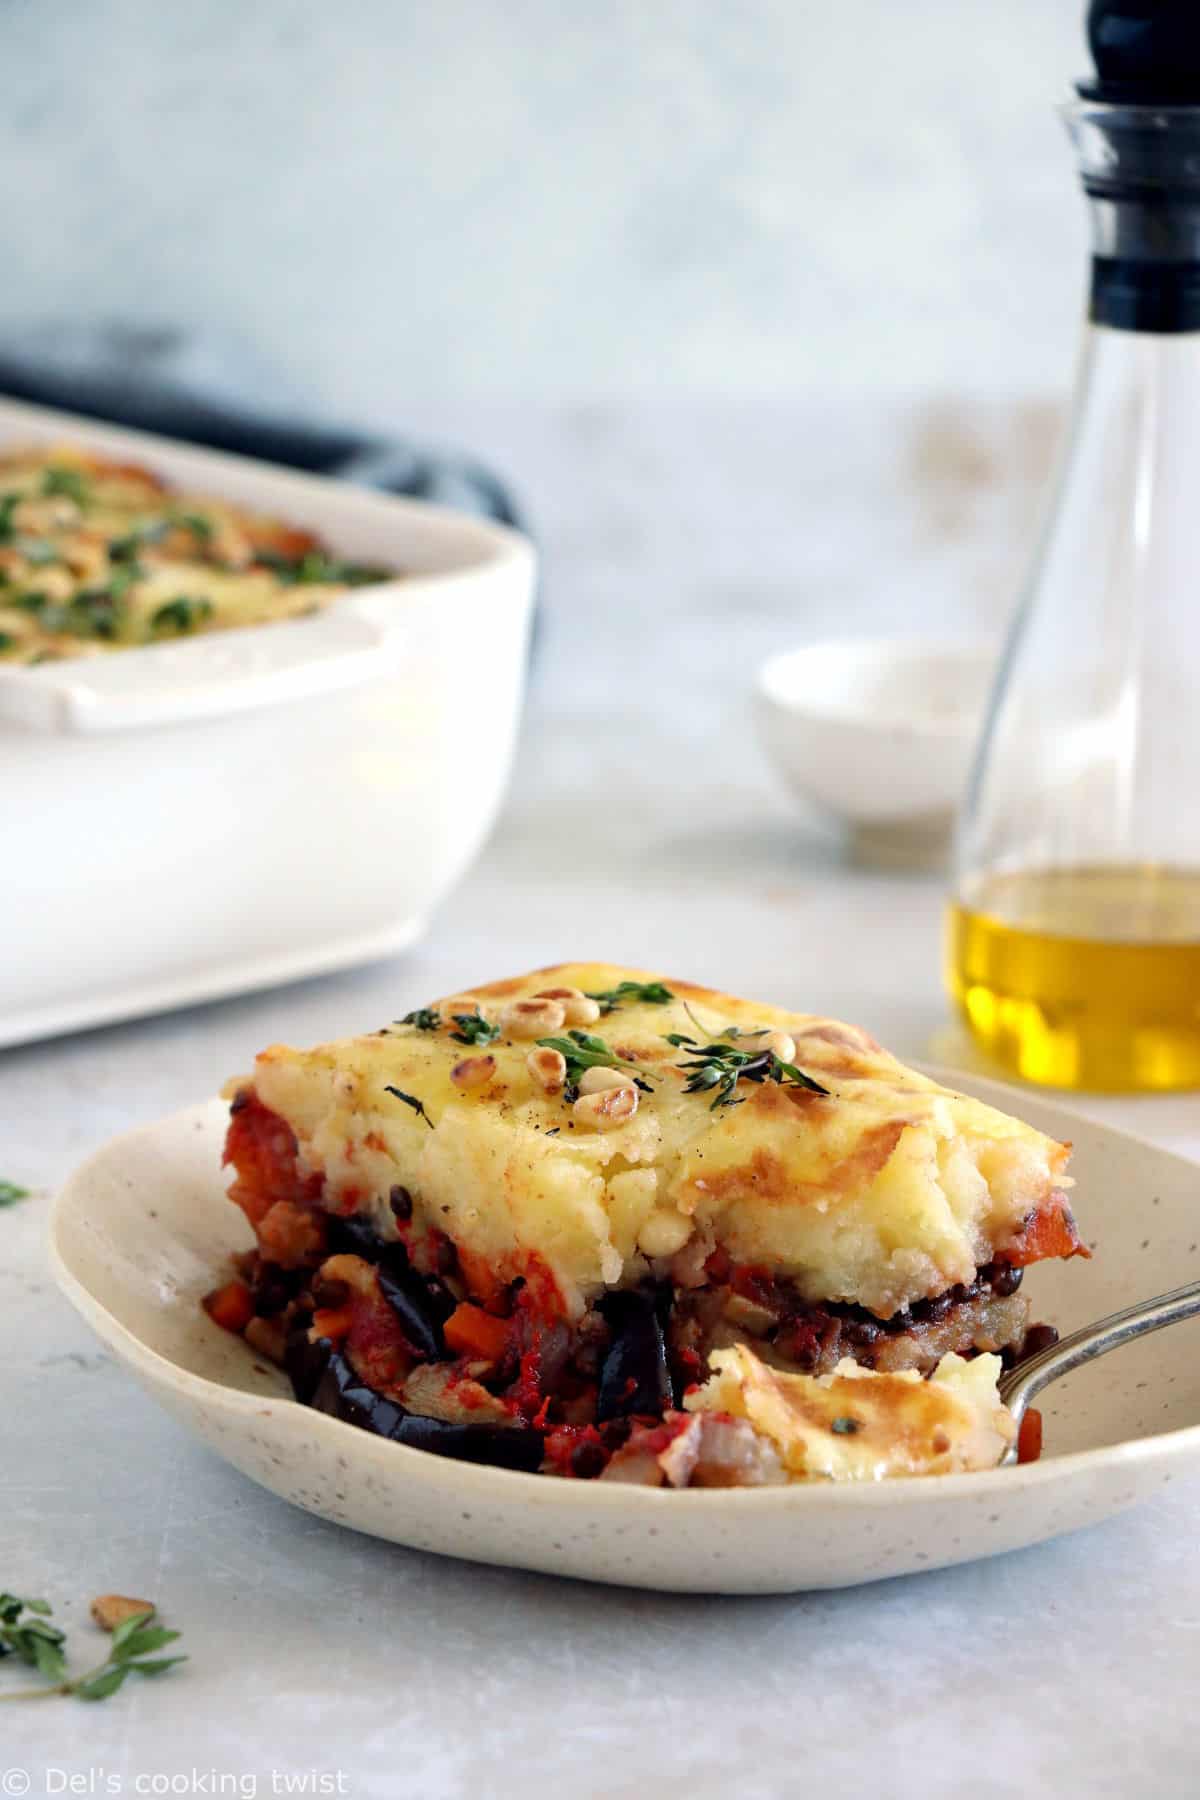 This vegetarian moussaka has some deep smoky flavors, with layers of eggplants, potatoes, spiced vegetarian meat, and a creamy bechamel sauce.